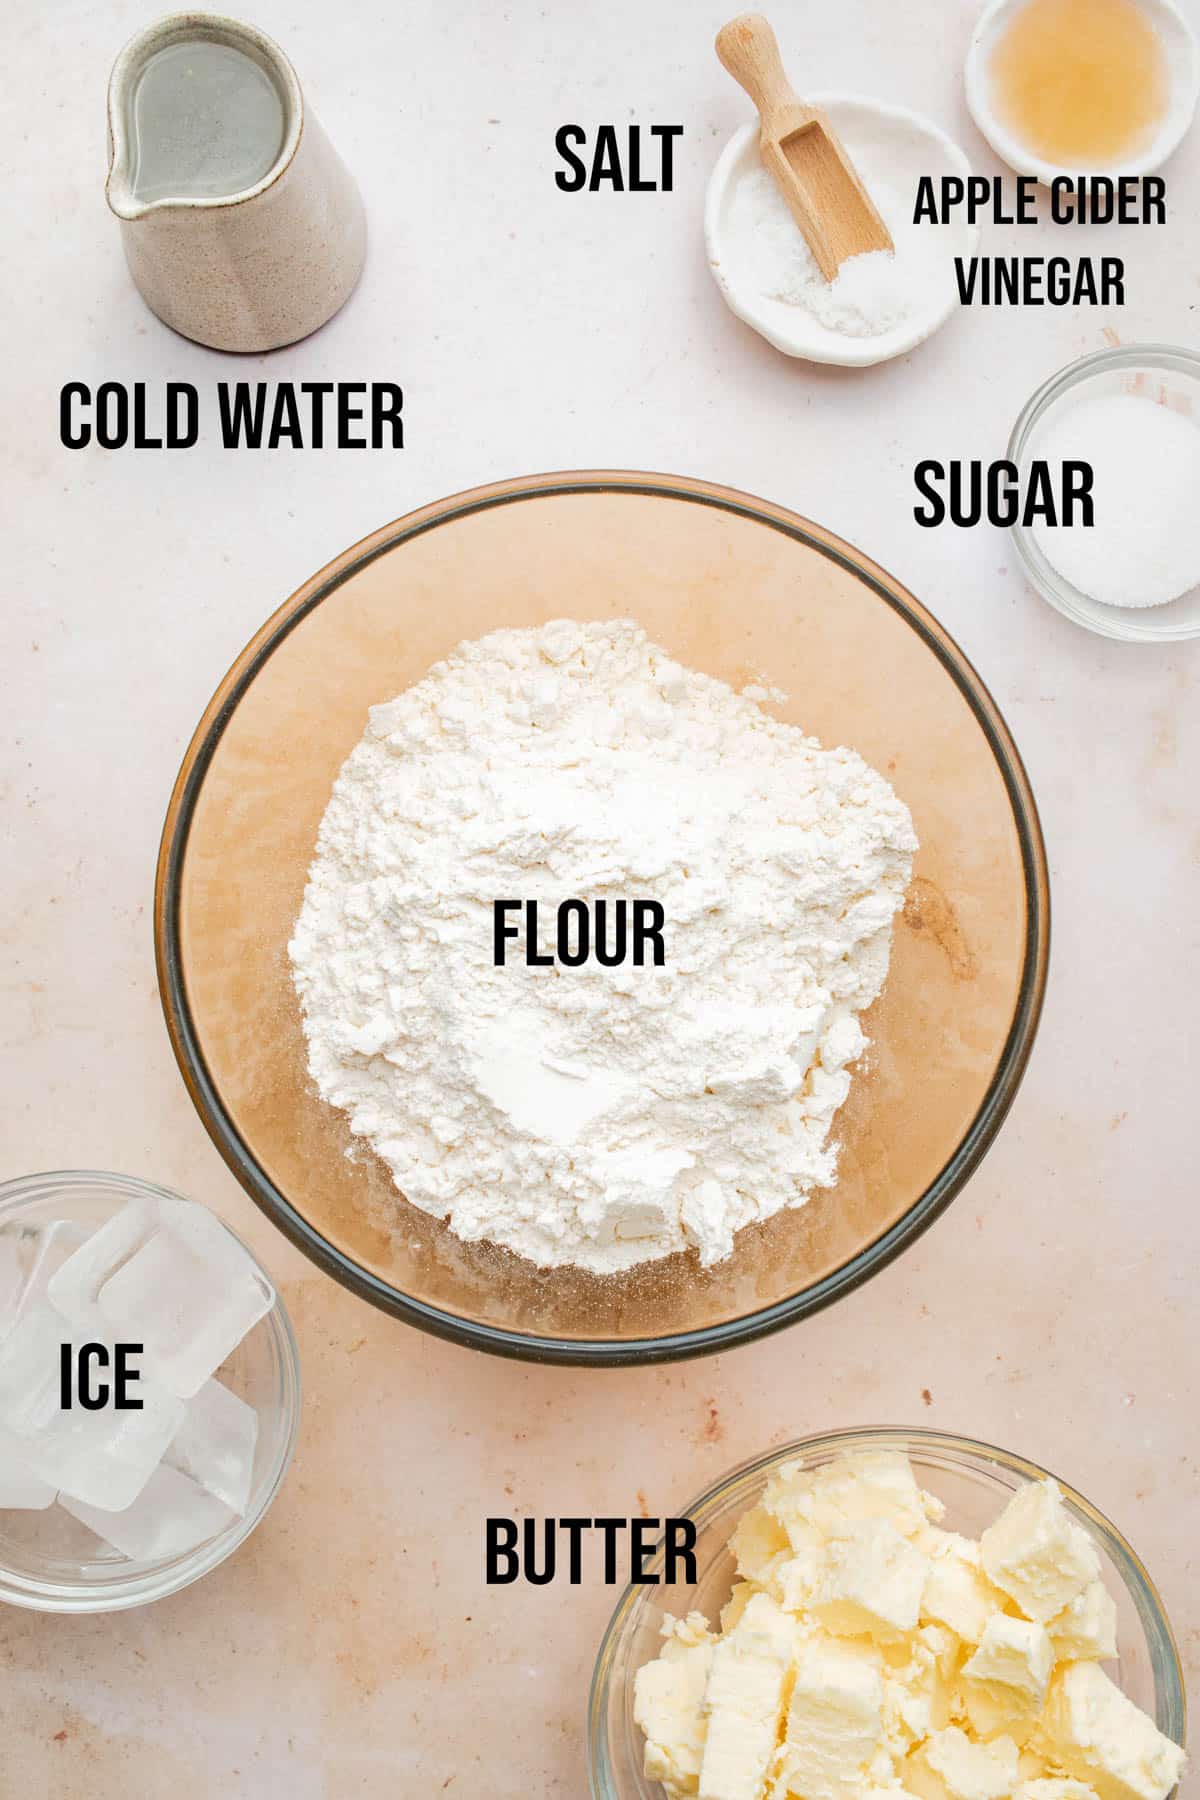 Pie crust ingredients with labels.